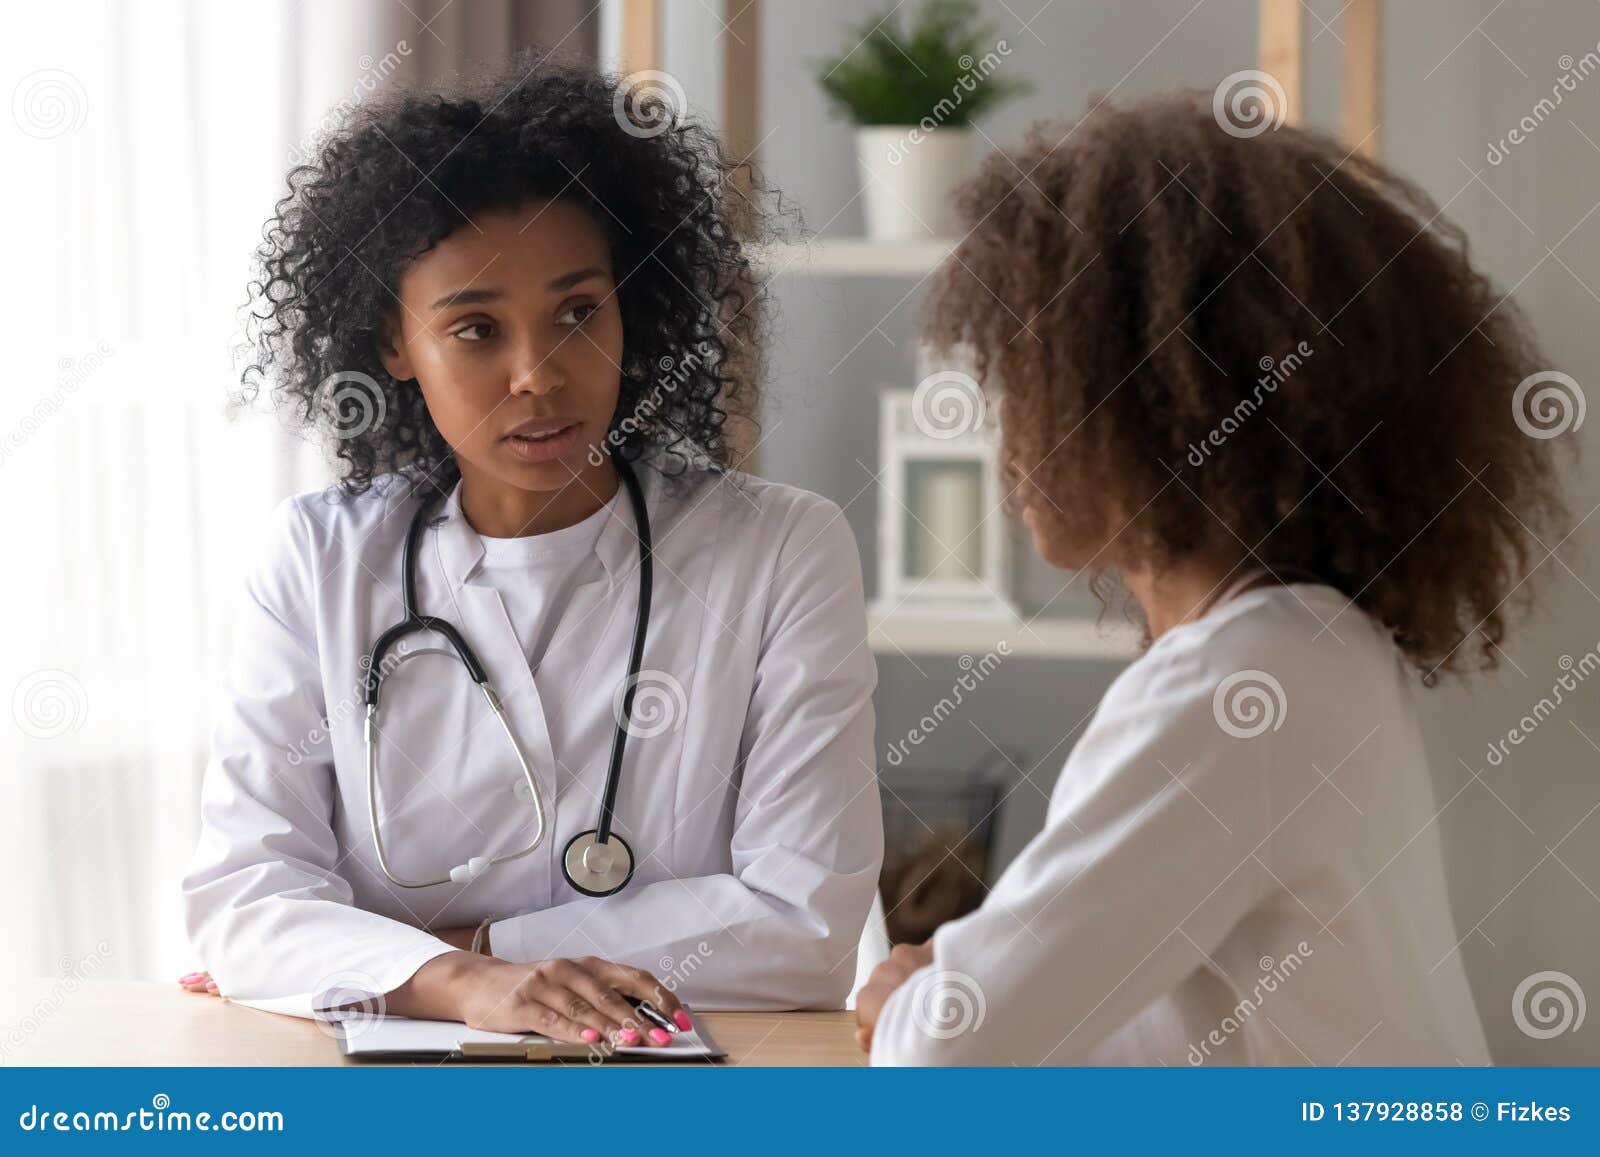 serious black female doctor consult teenage girl